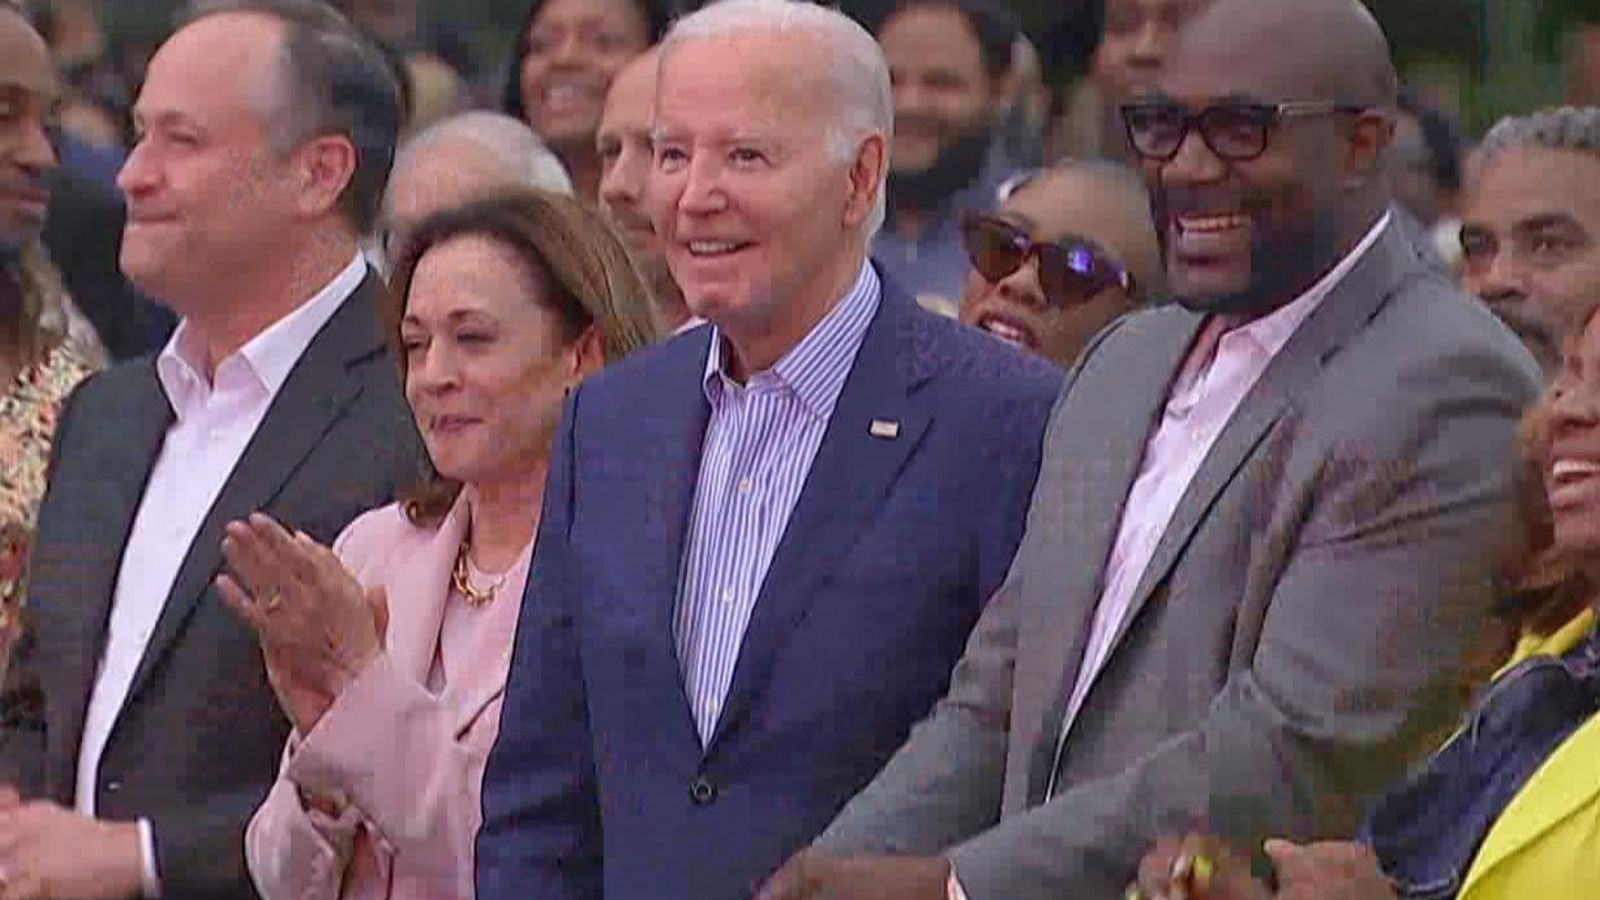 Biden appears to freeze for several seconds at White House event